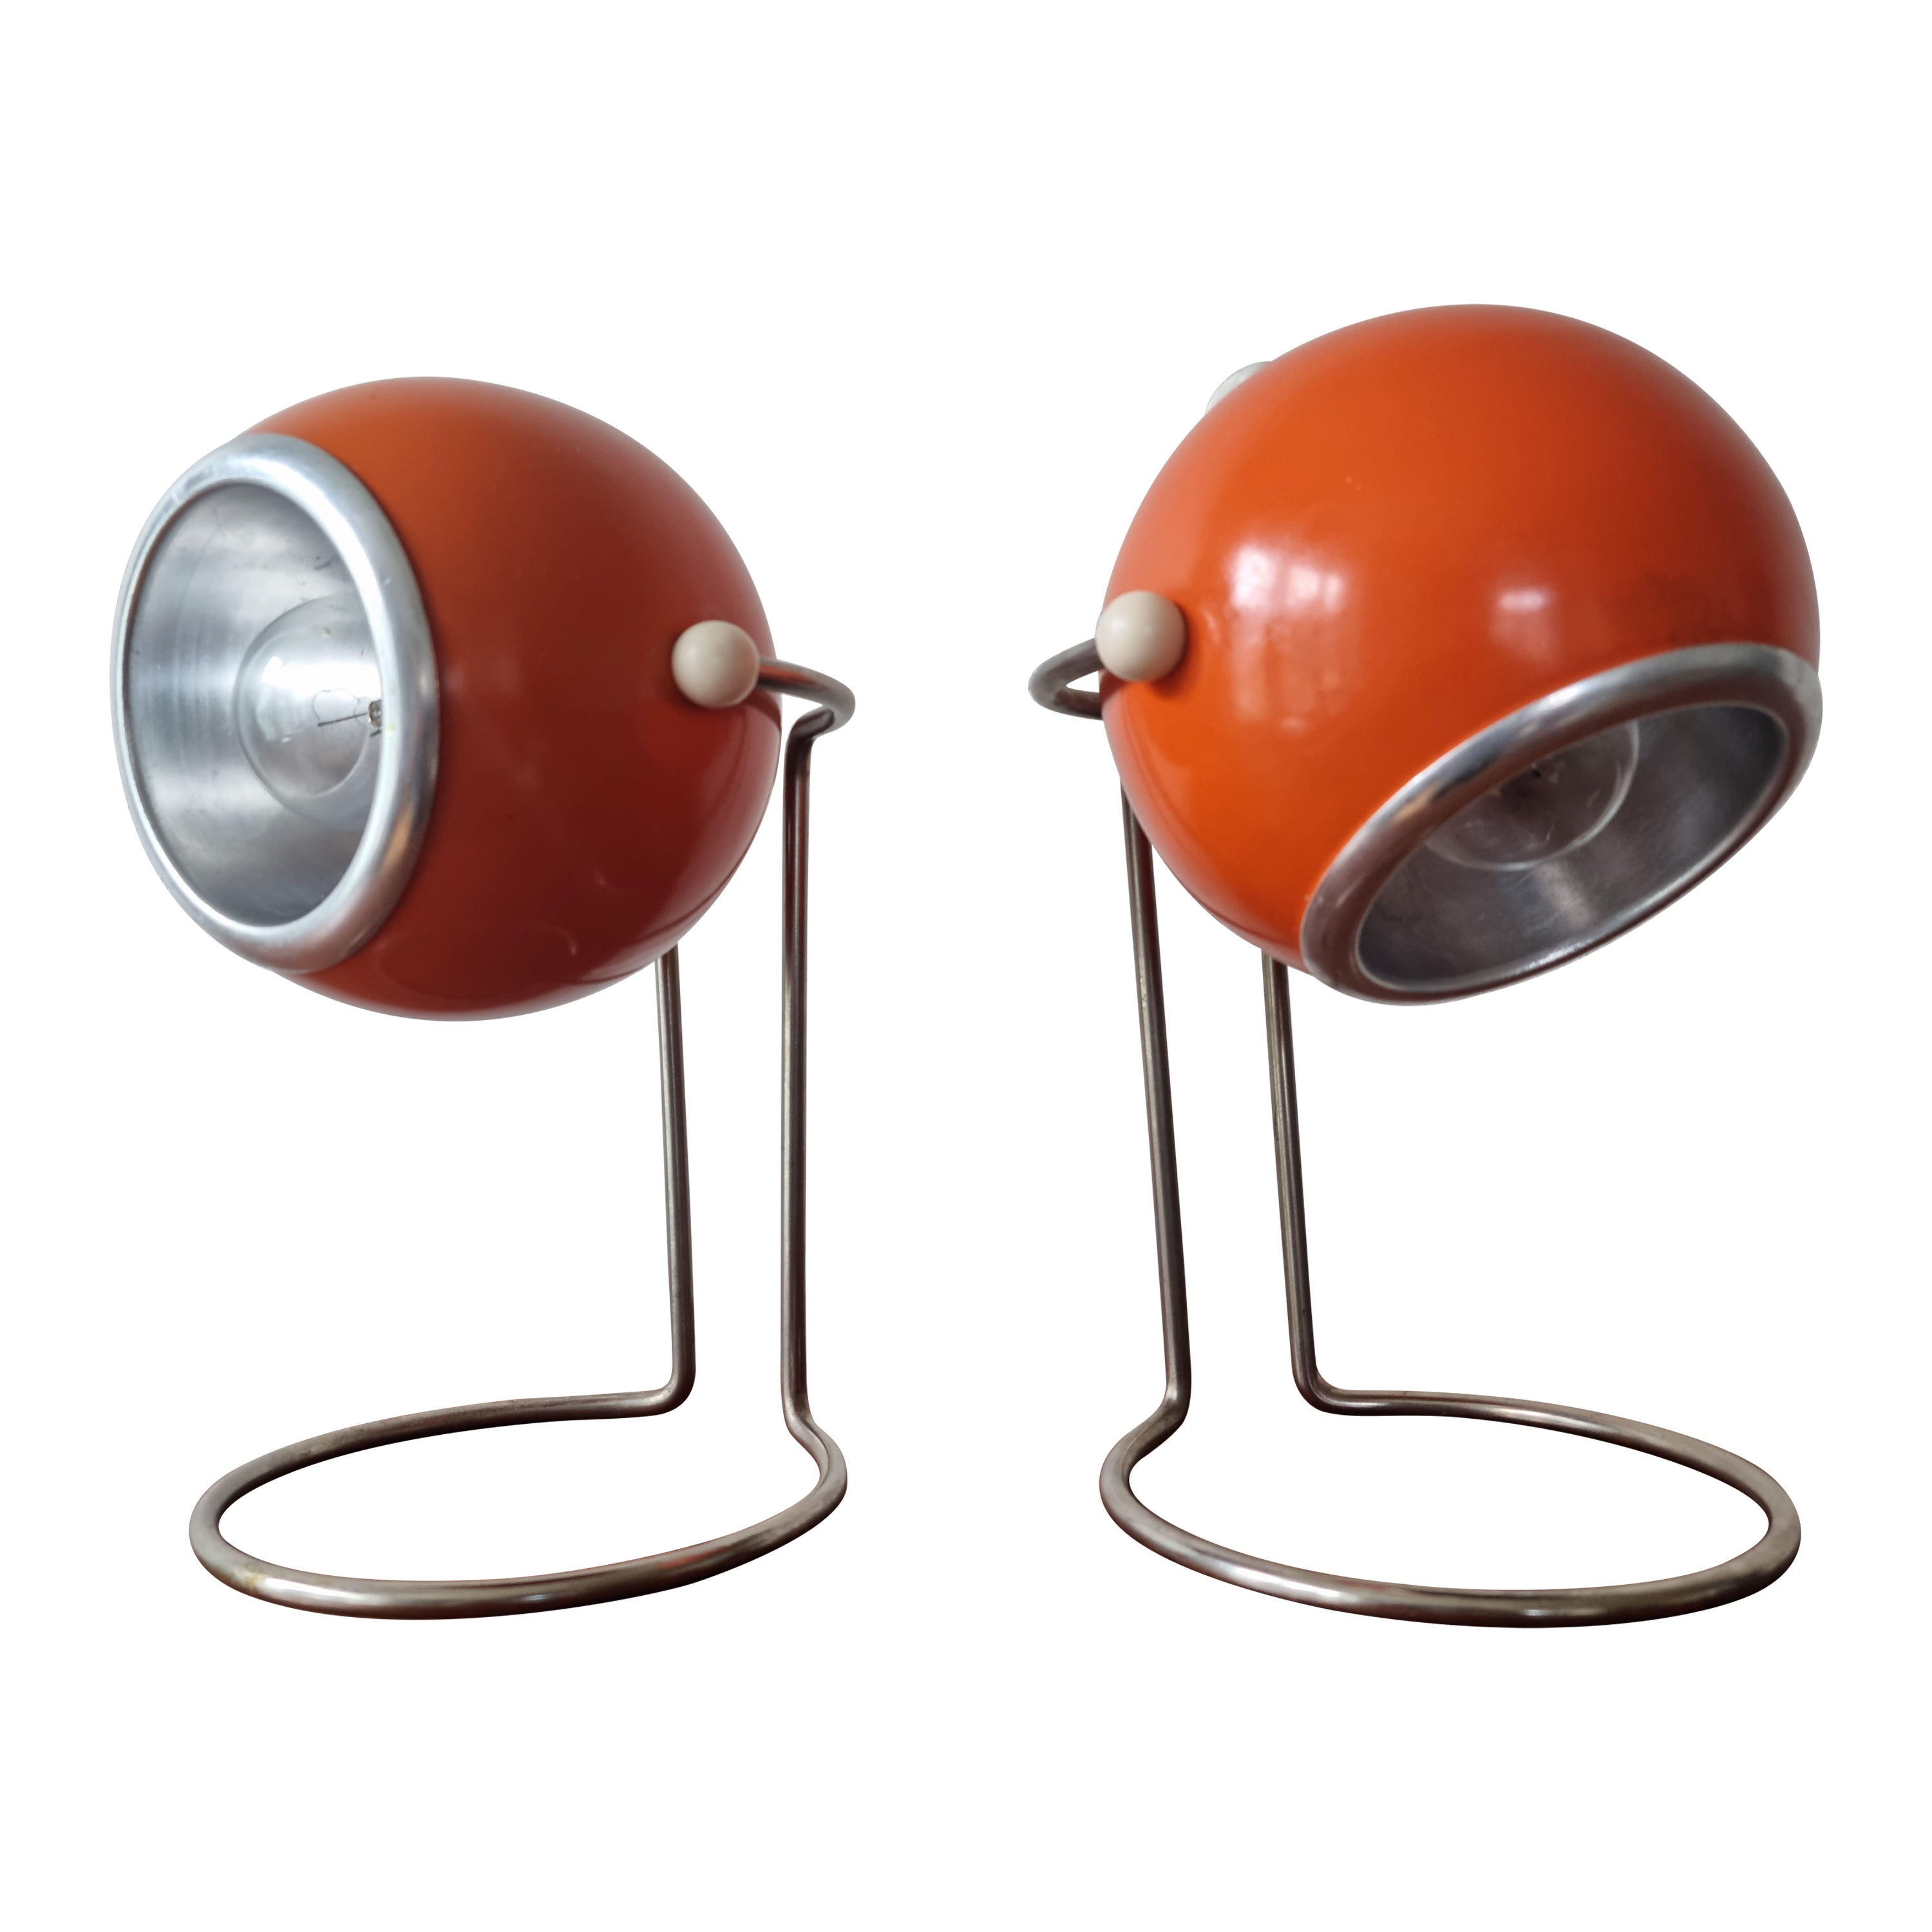 Pair of Midcentury Table Lamps, Eye Ball, 1970s